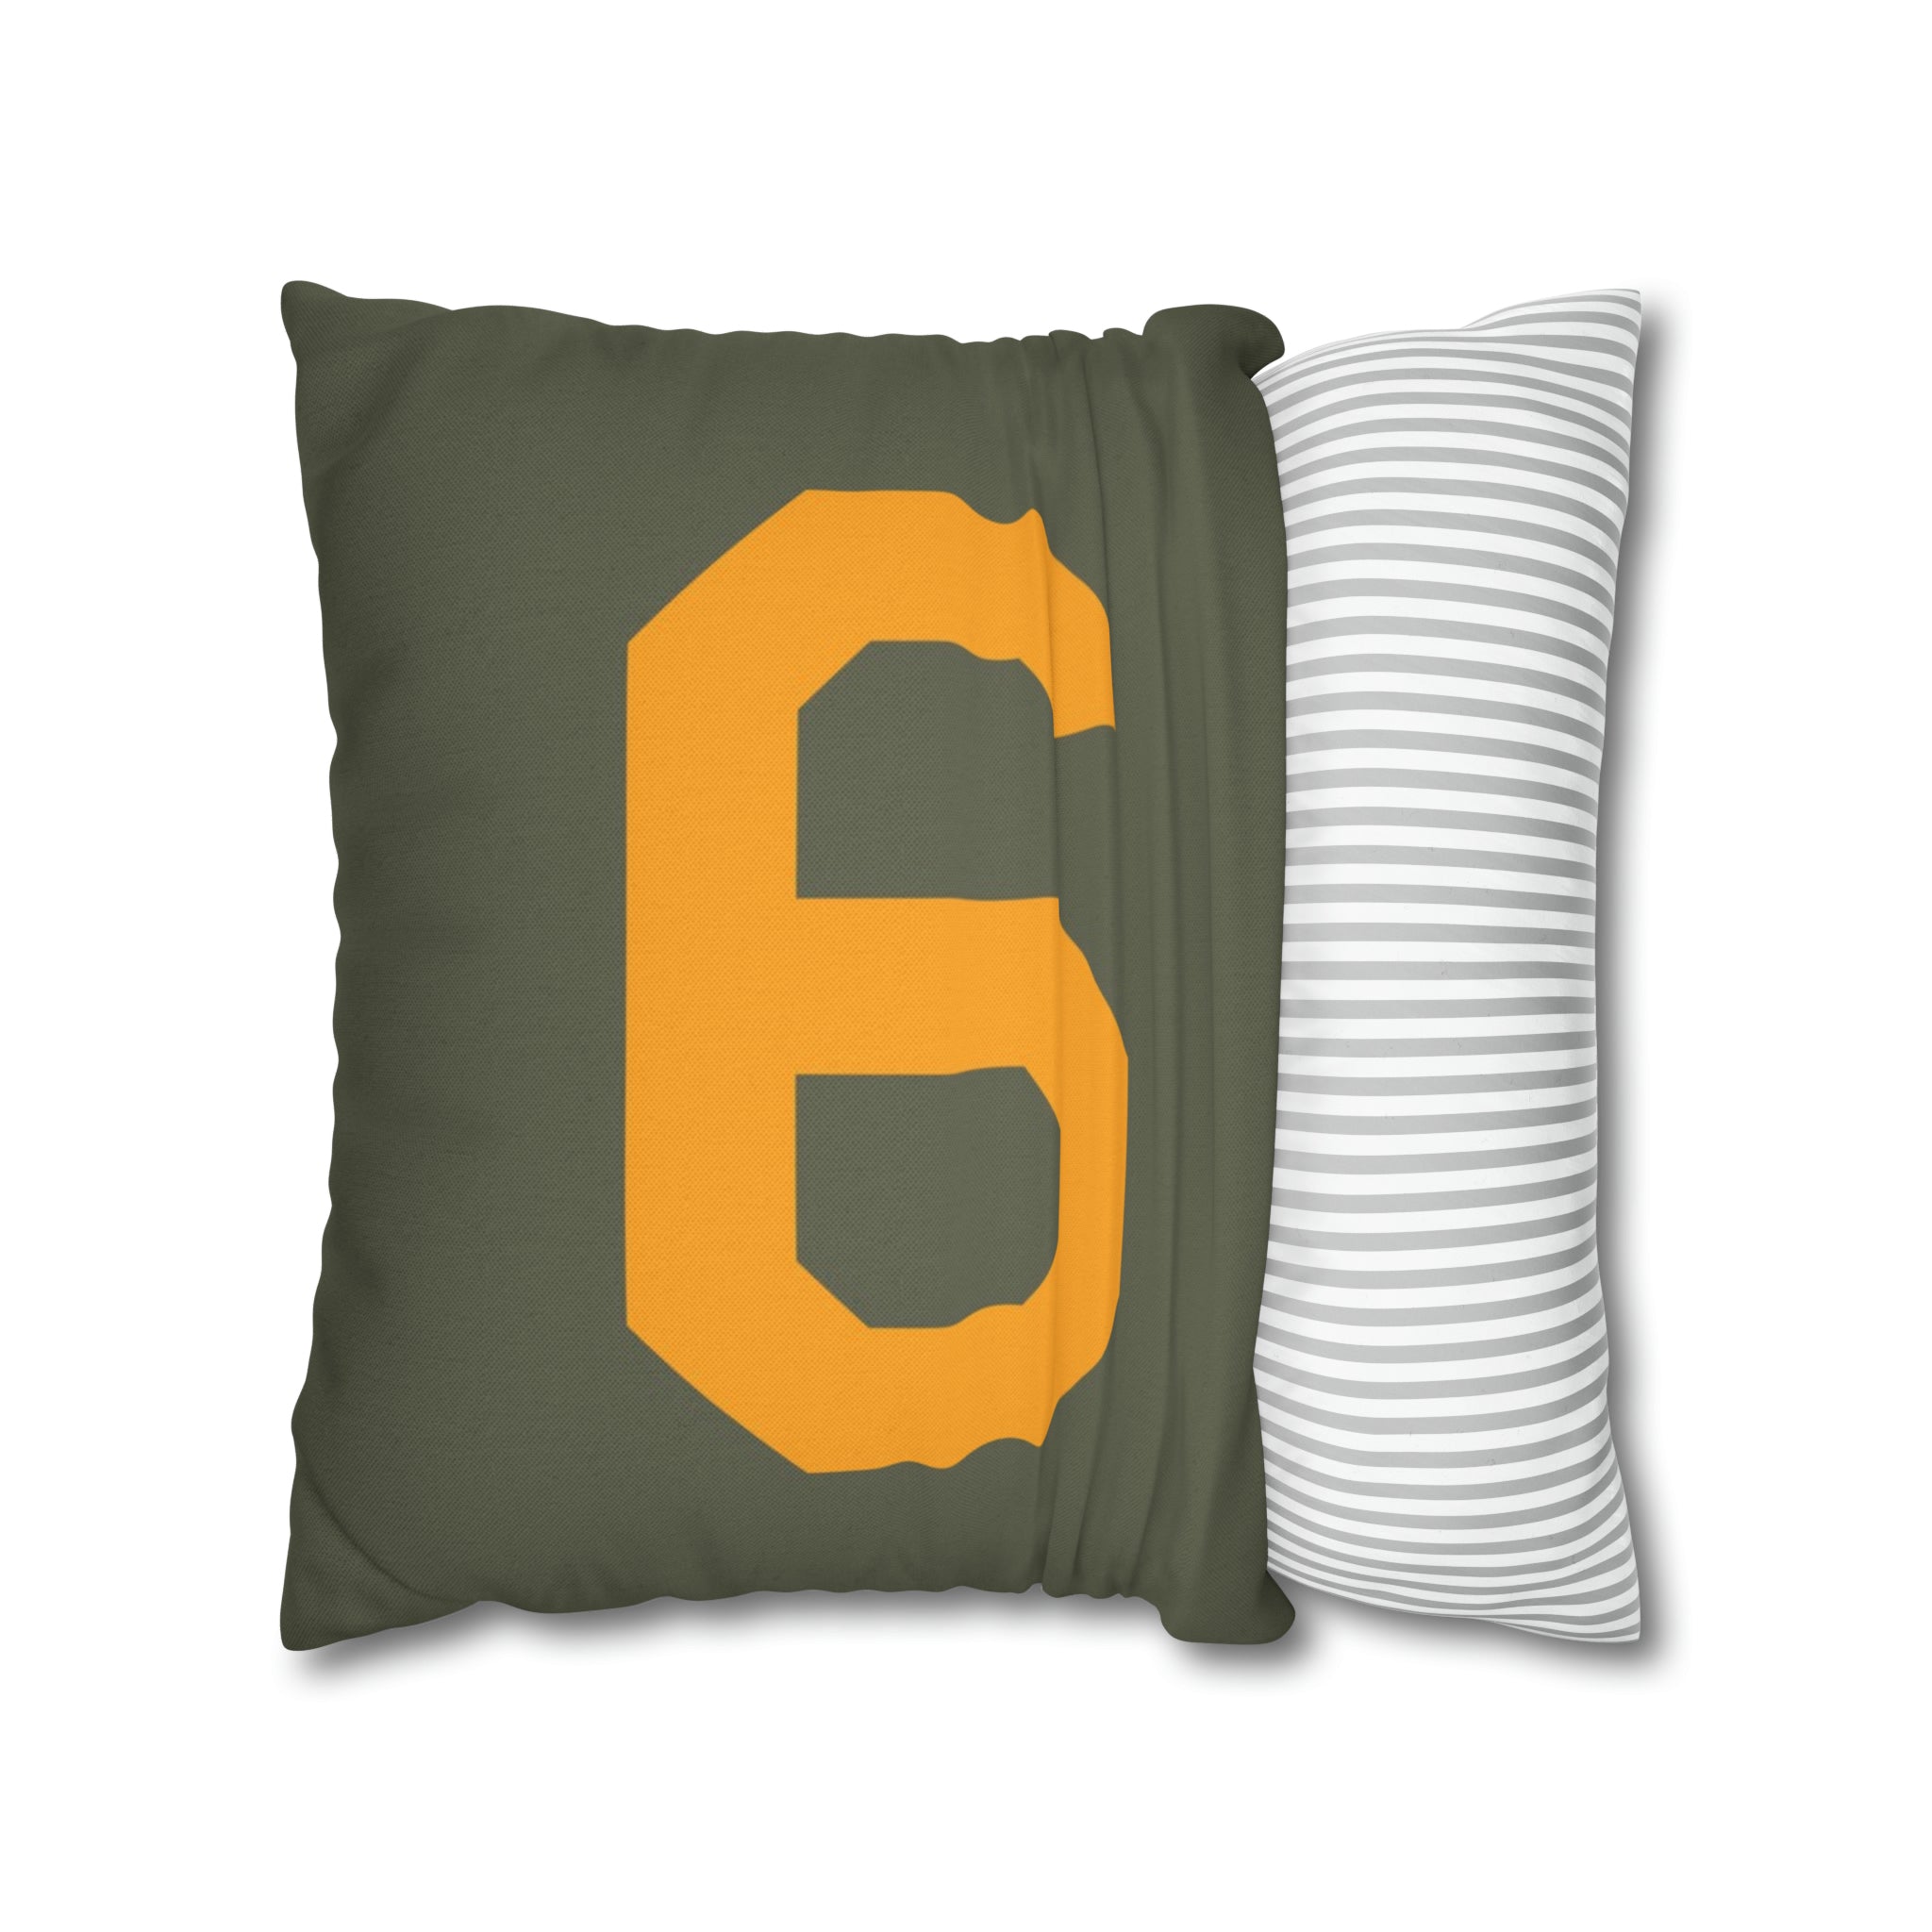 WWII USAAF Number "6" Square Pillowcase - I Love a Hangar